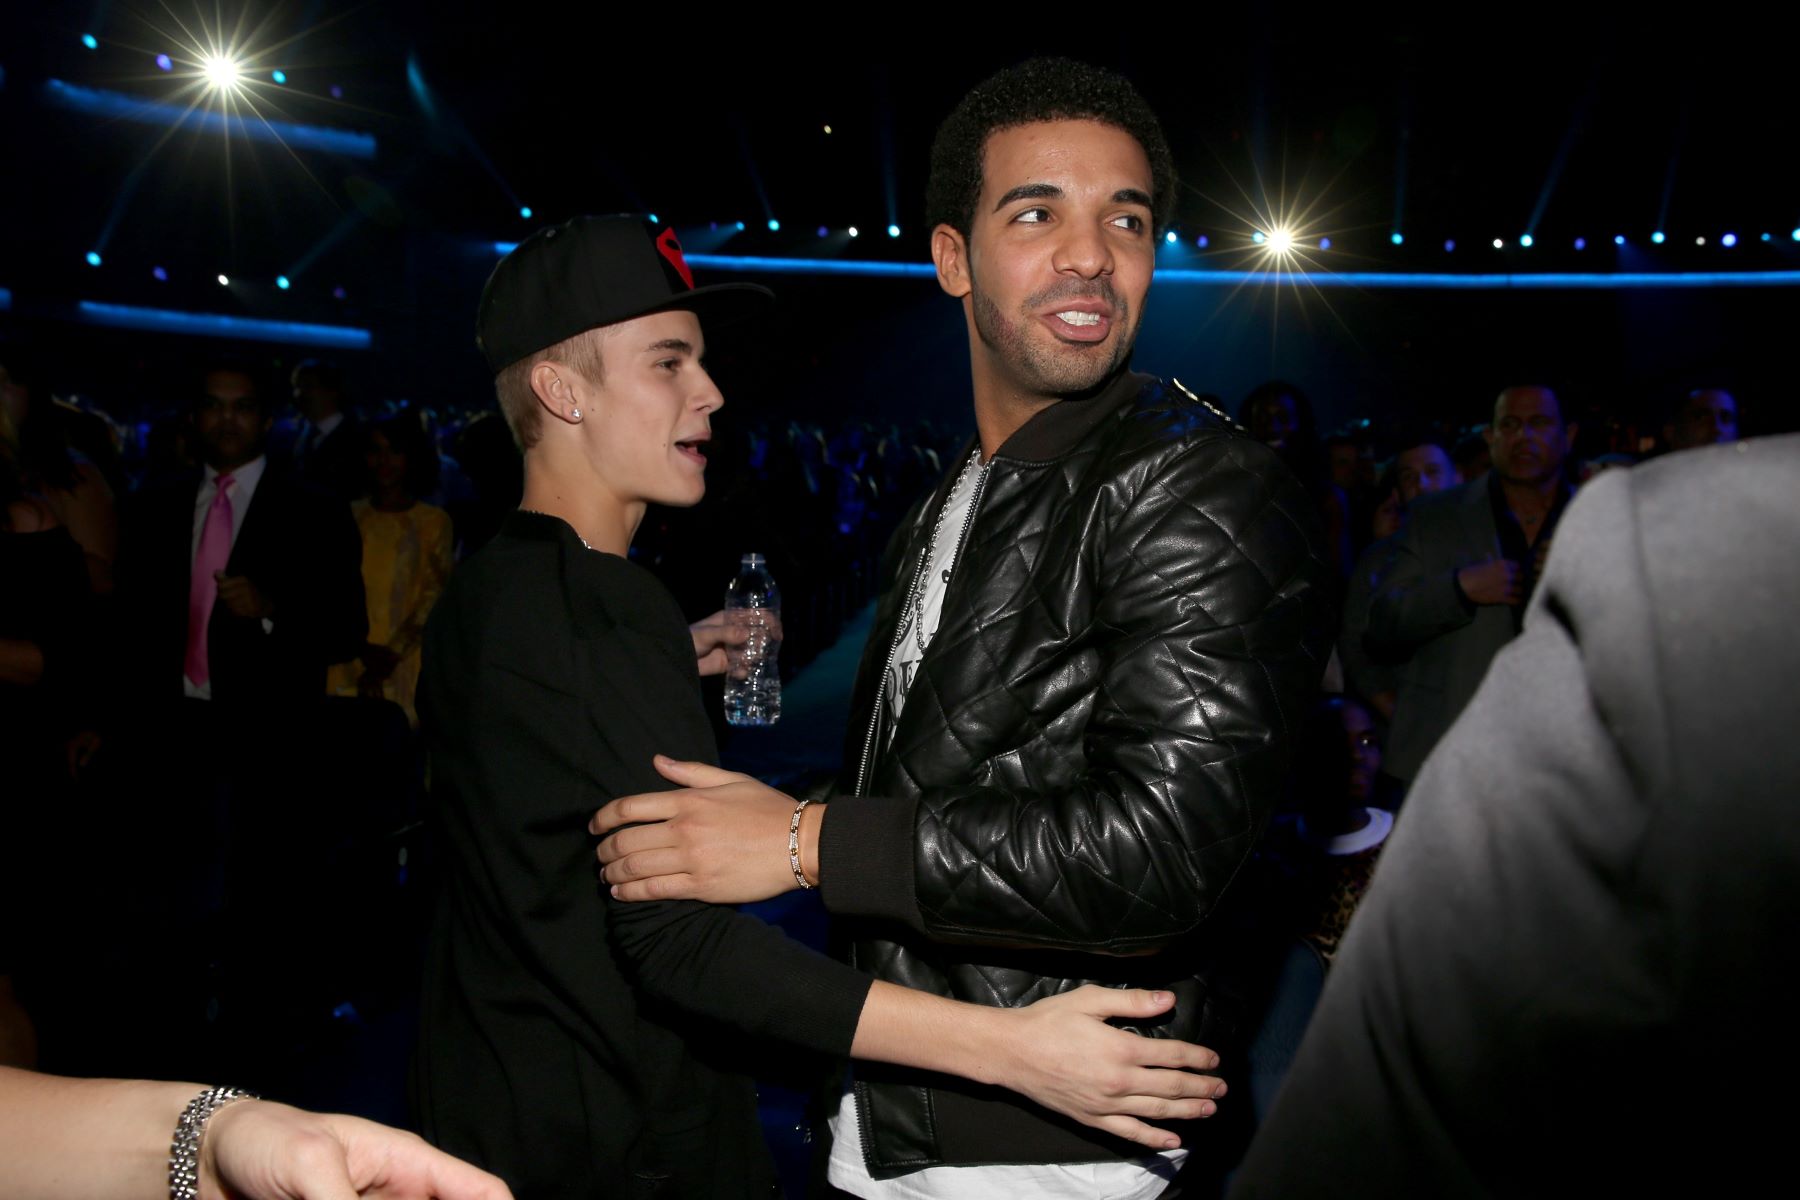 Drake and Justin Bieber at the 40th American Music Awards at the Nokia Theatre in Los Angeles, California